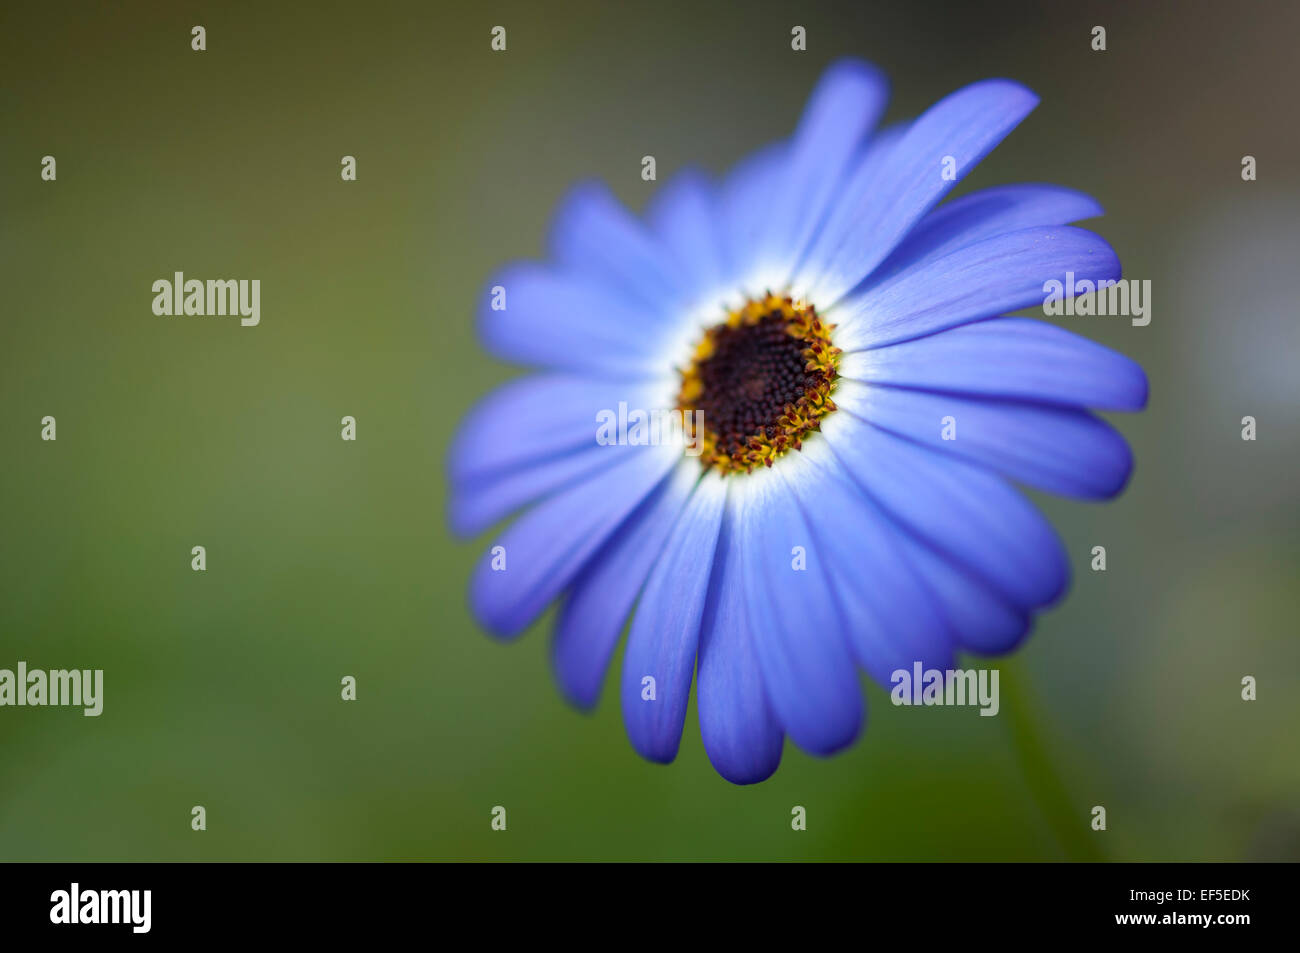 Blue Brachyscome flower (Swan river daisy) in close up against a soft green background. Stock Photo